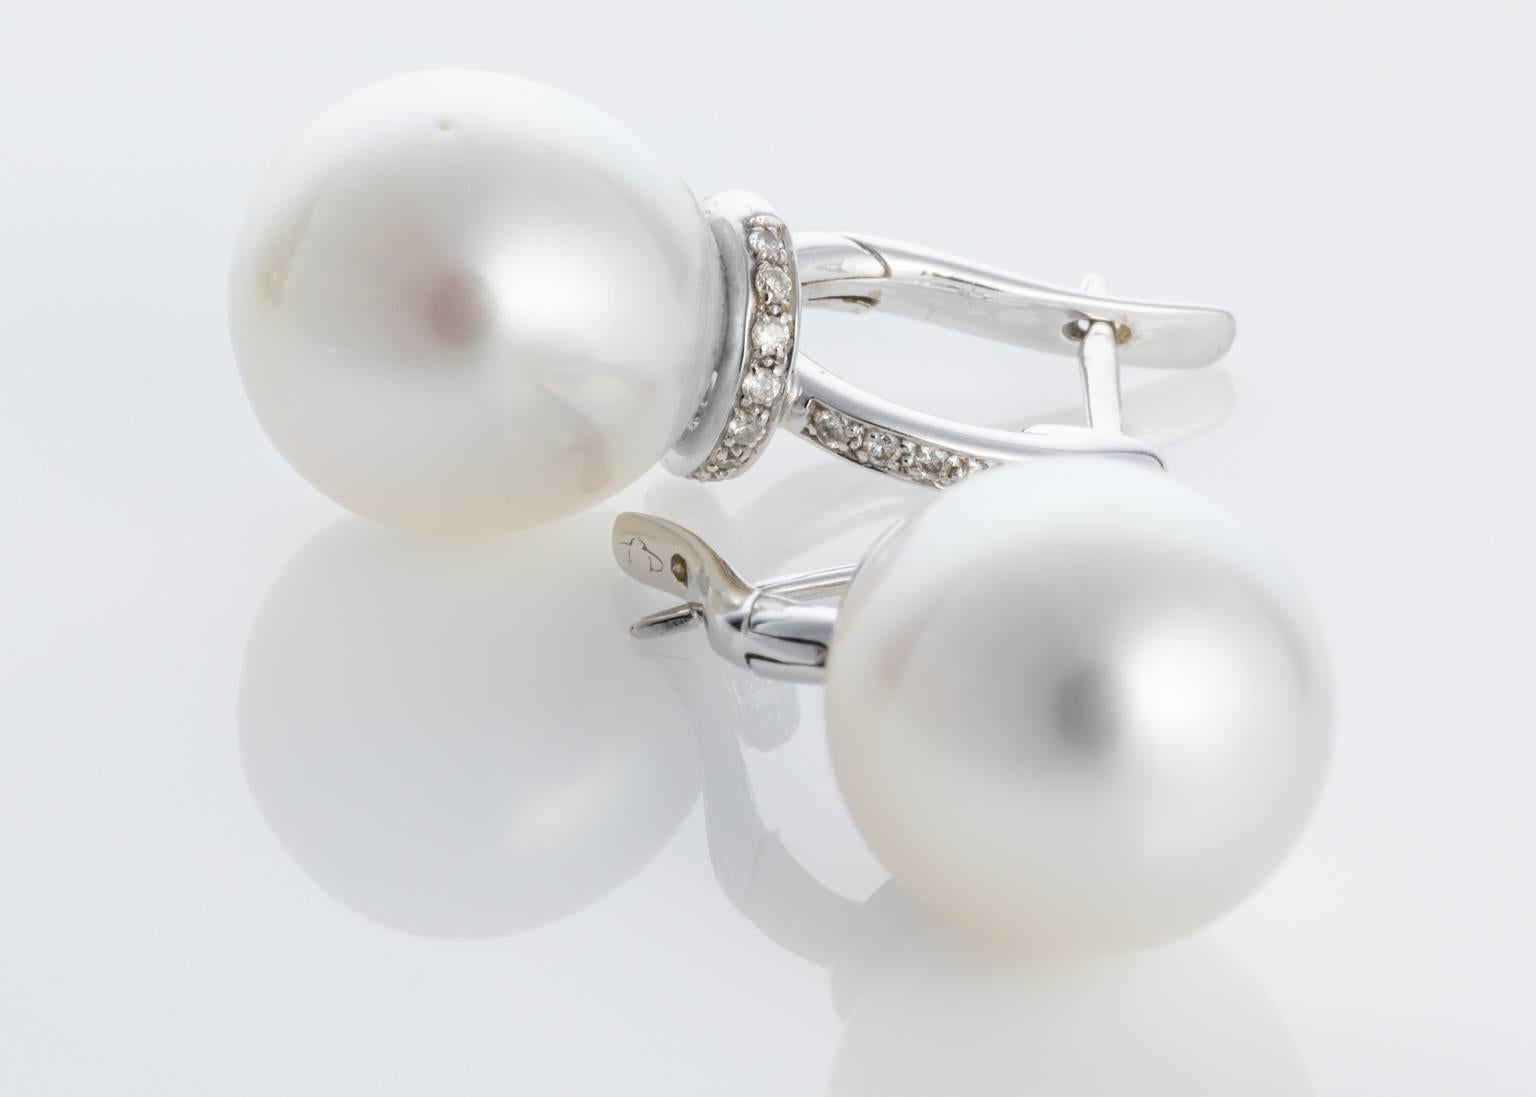 A magnificent pair of South Sea Pearl & Diamond earrings. Set with two South Sea pearls from Broome, Australia, weighing 12.5-13mm, oval shape, silver white in colour, very good lustre, A-1 quality. Set with approximately 0.20cts of brilliant cut